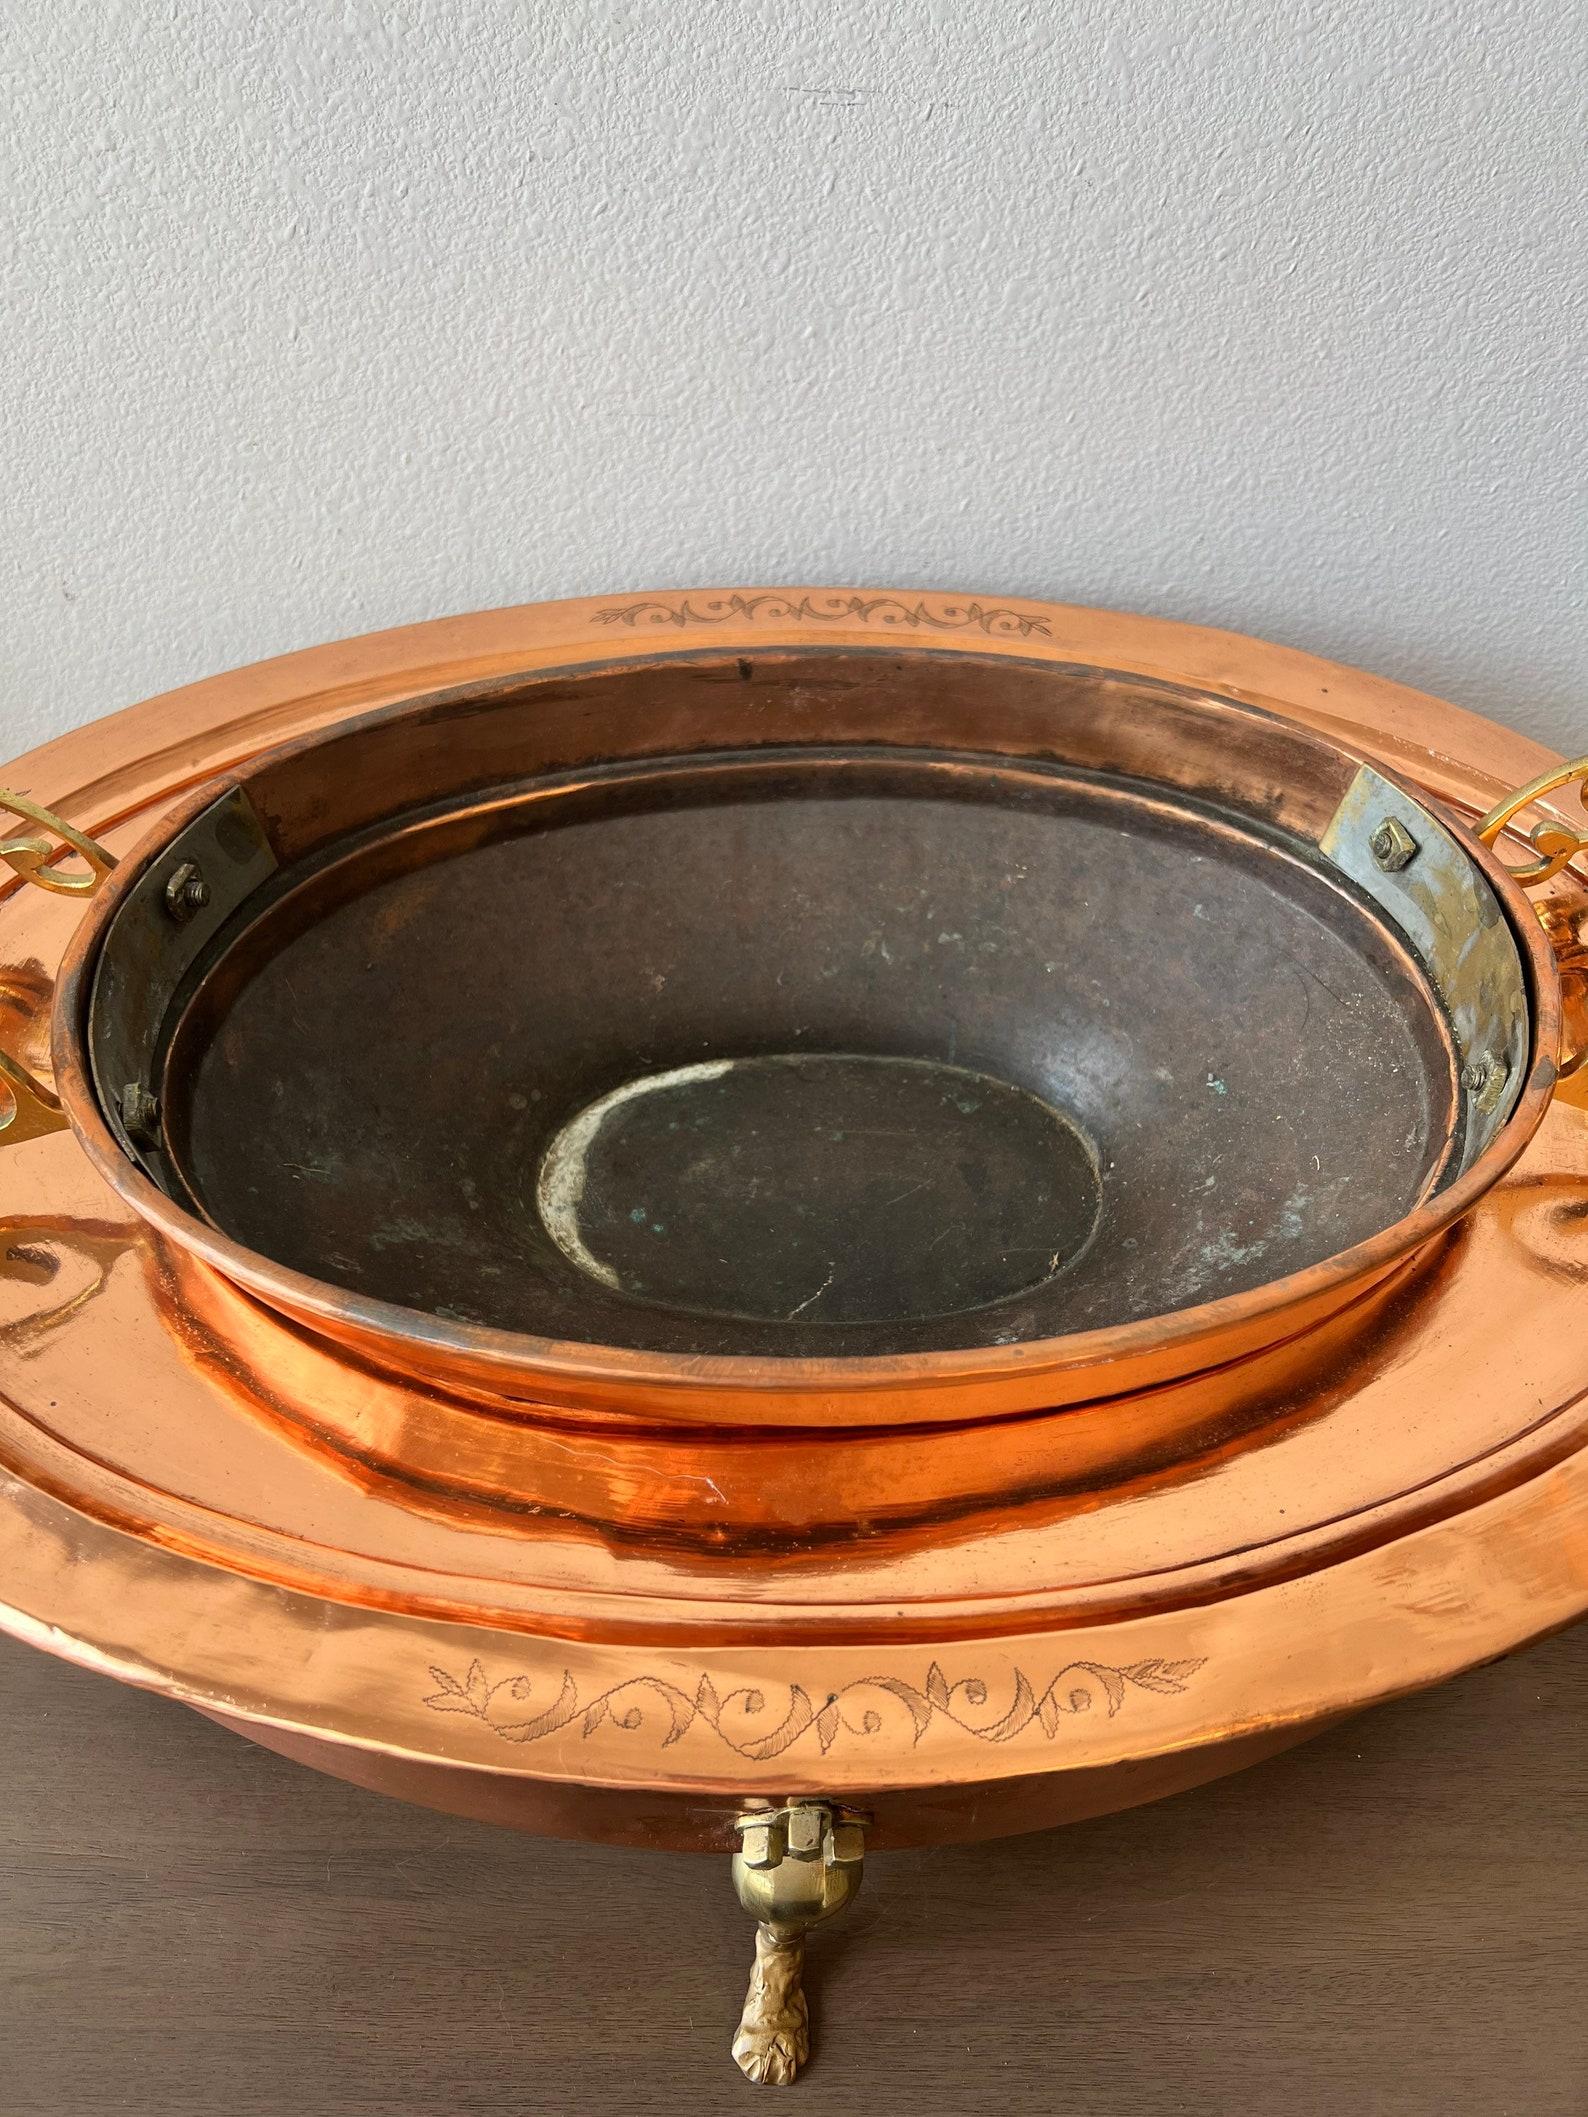 Antique Middle Eastern Copper & Brass Chafing Dish In Good Condition For Sale In Forney, TX